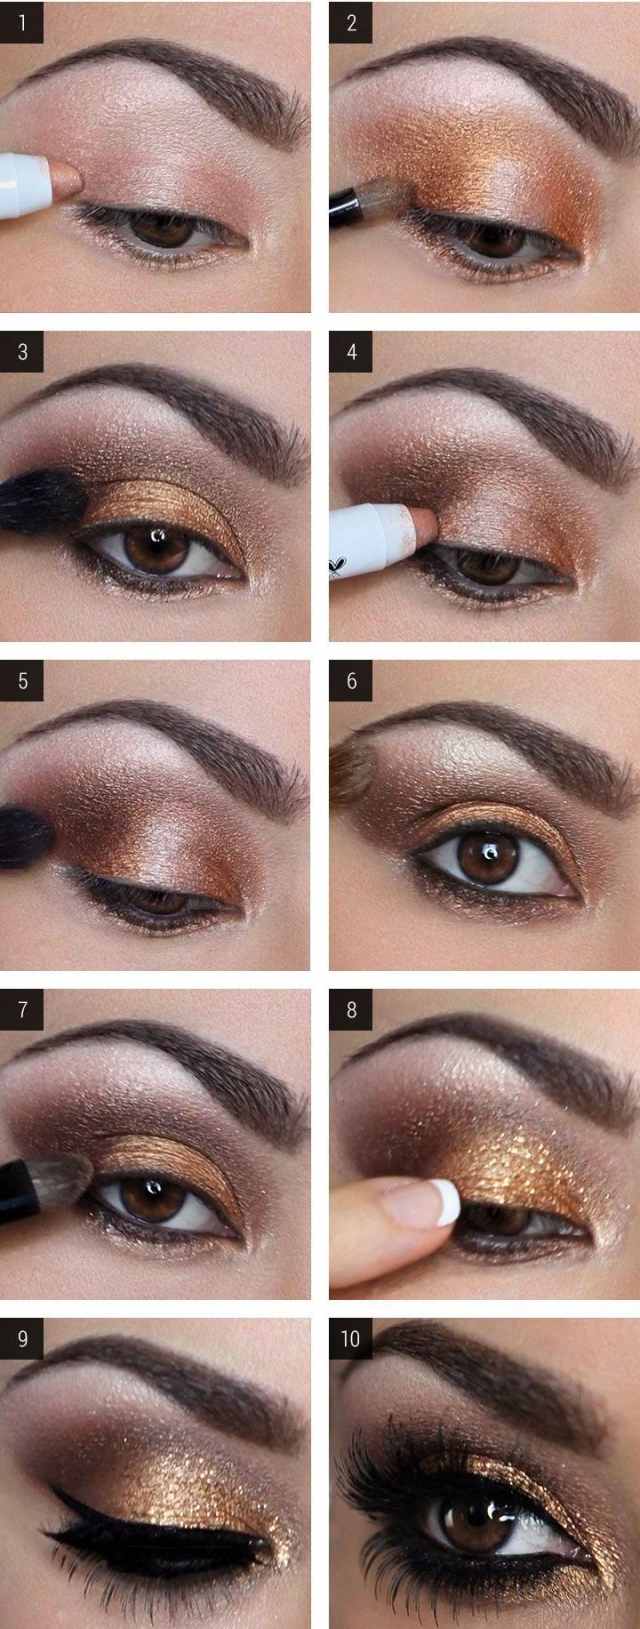 tuto-maquillage-yeux-marron-mascara-khôl-particules-or tuto maquillage yeux